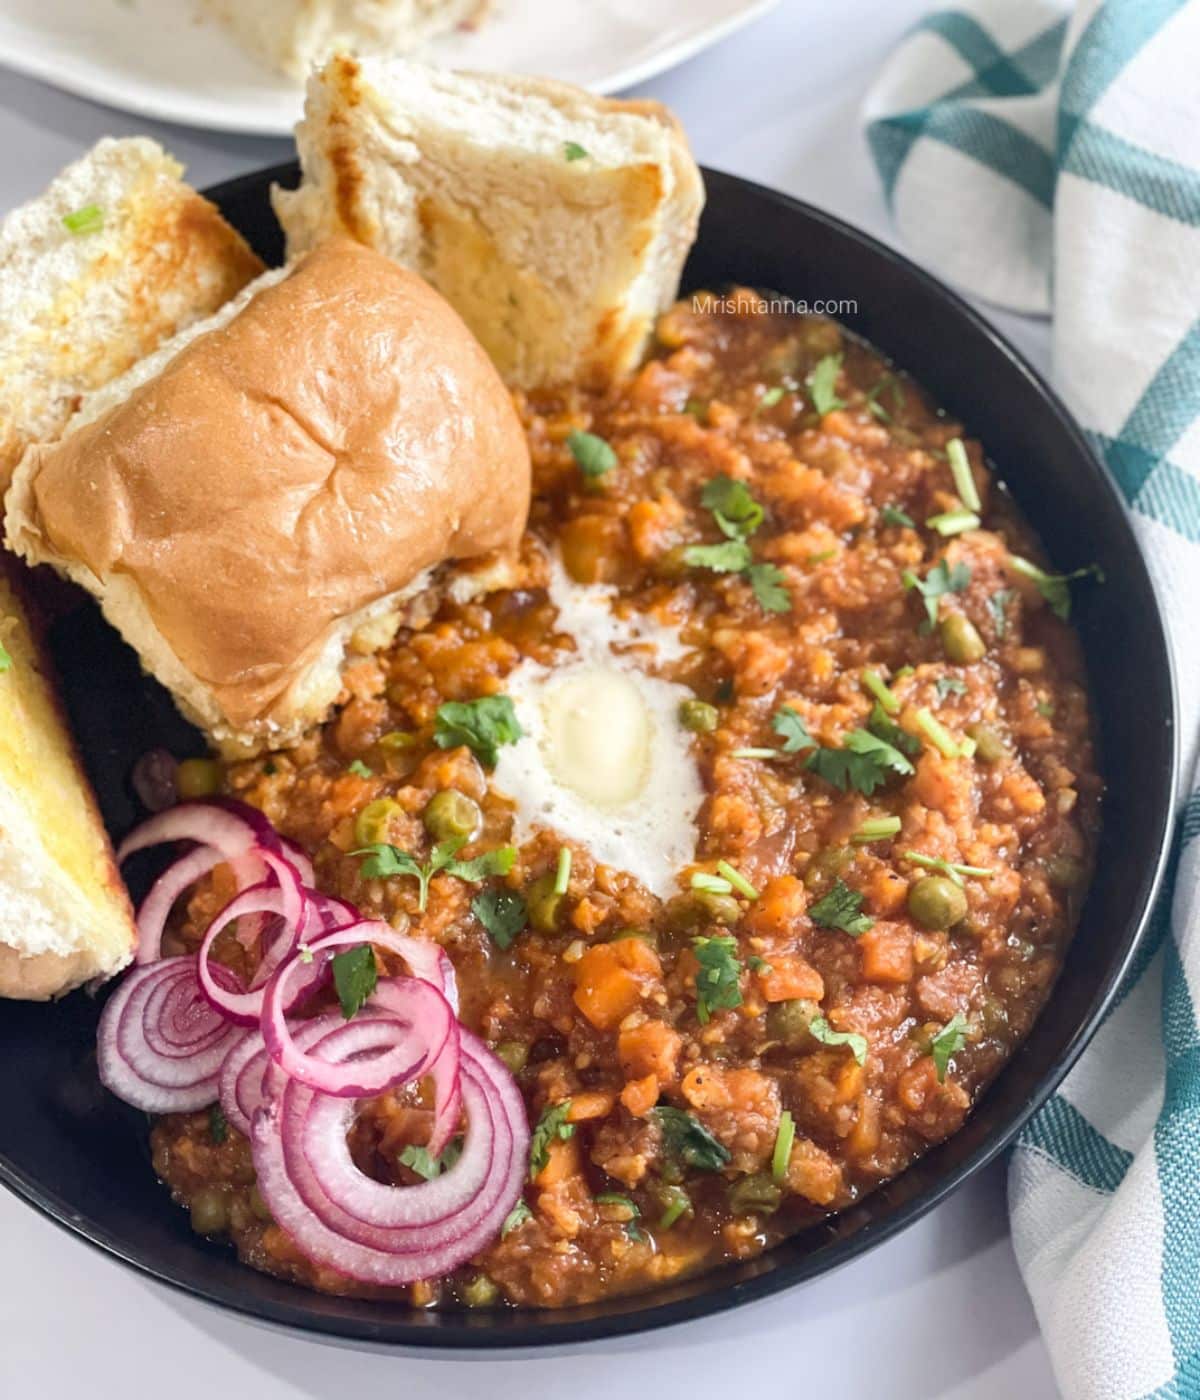 A plate of pav bhaji is on the table topped with vegan butter and sliced onions.